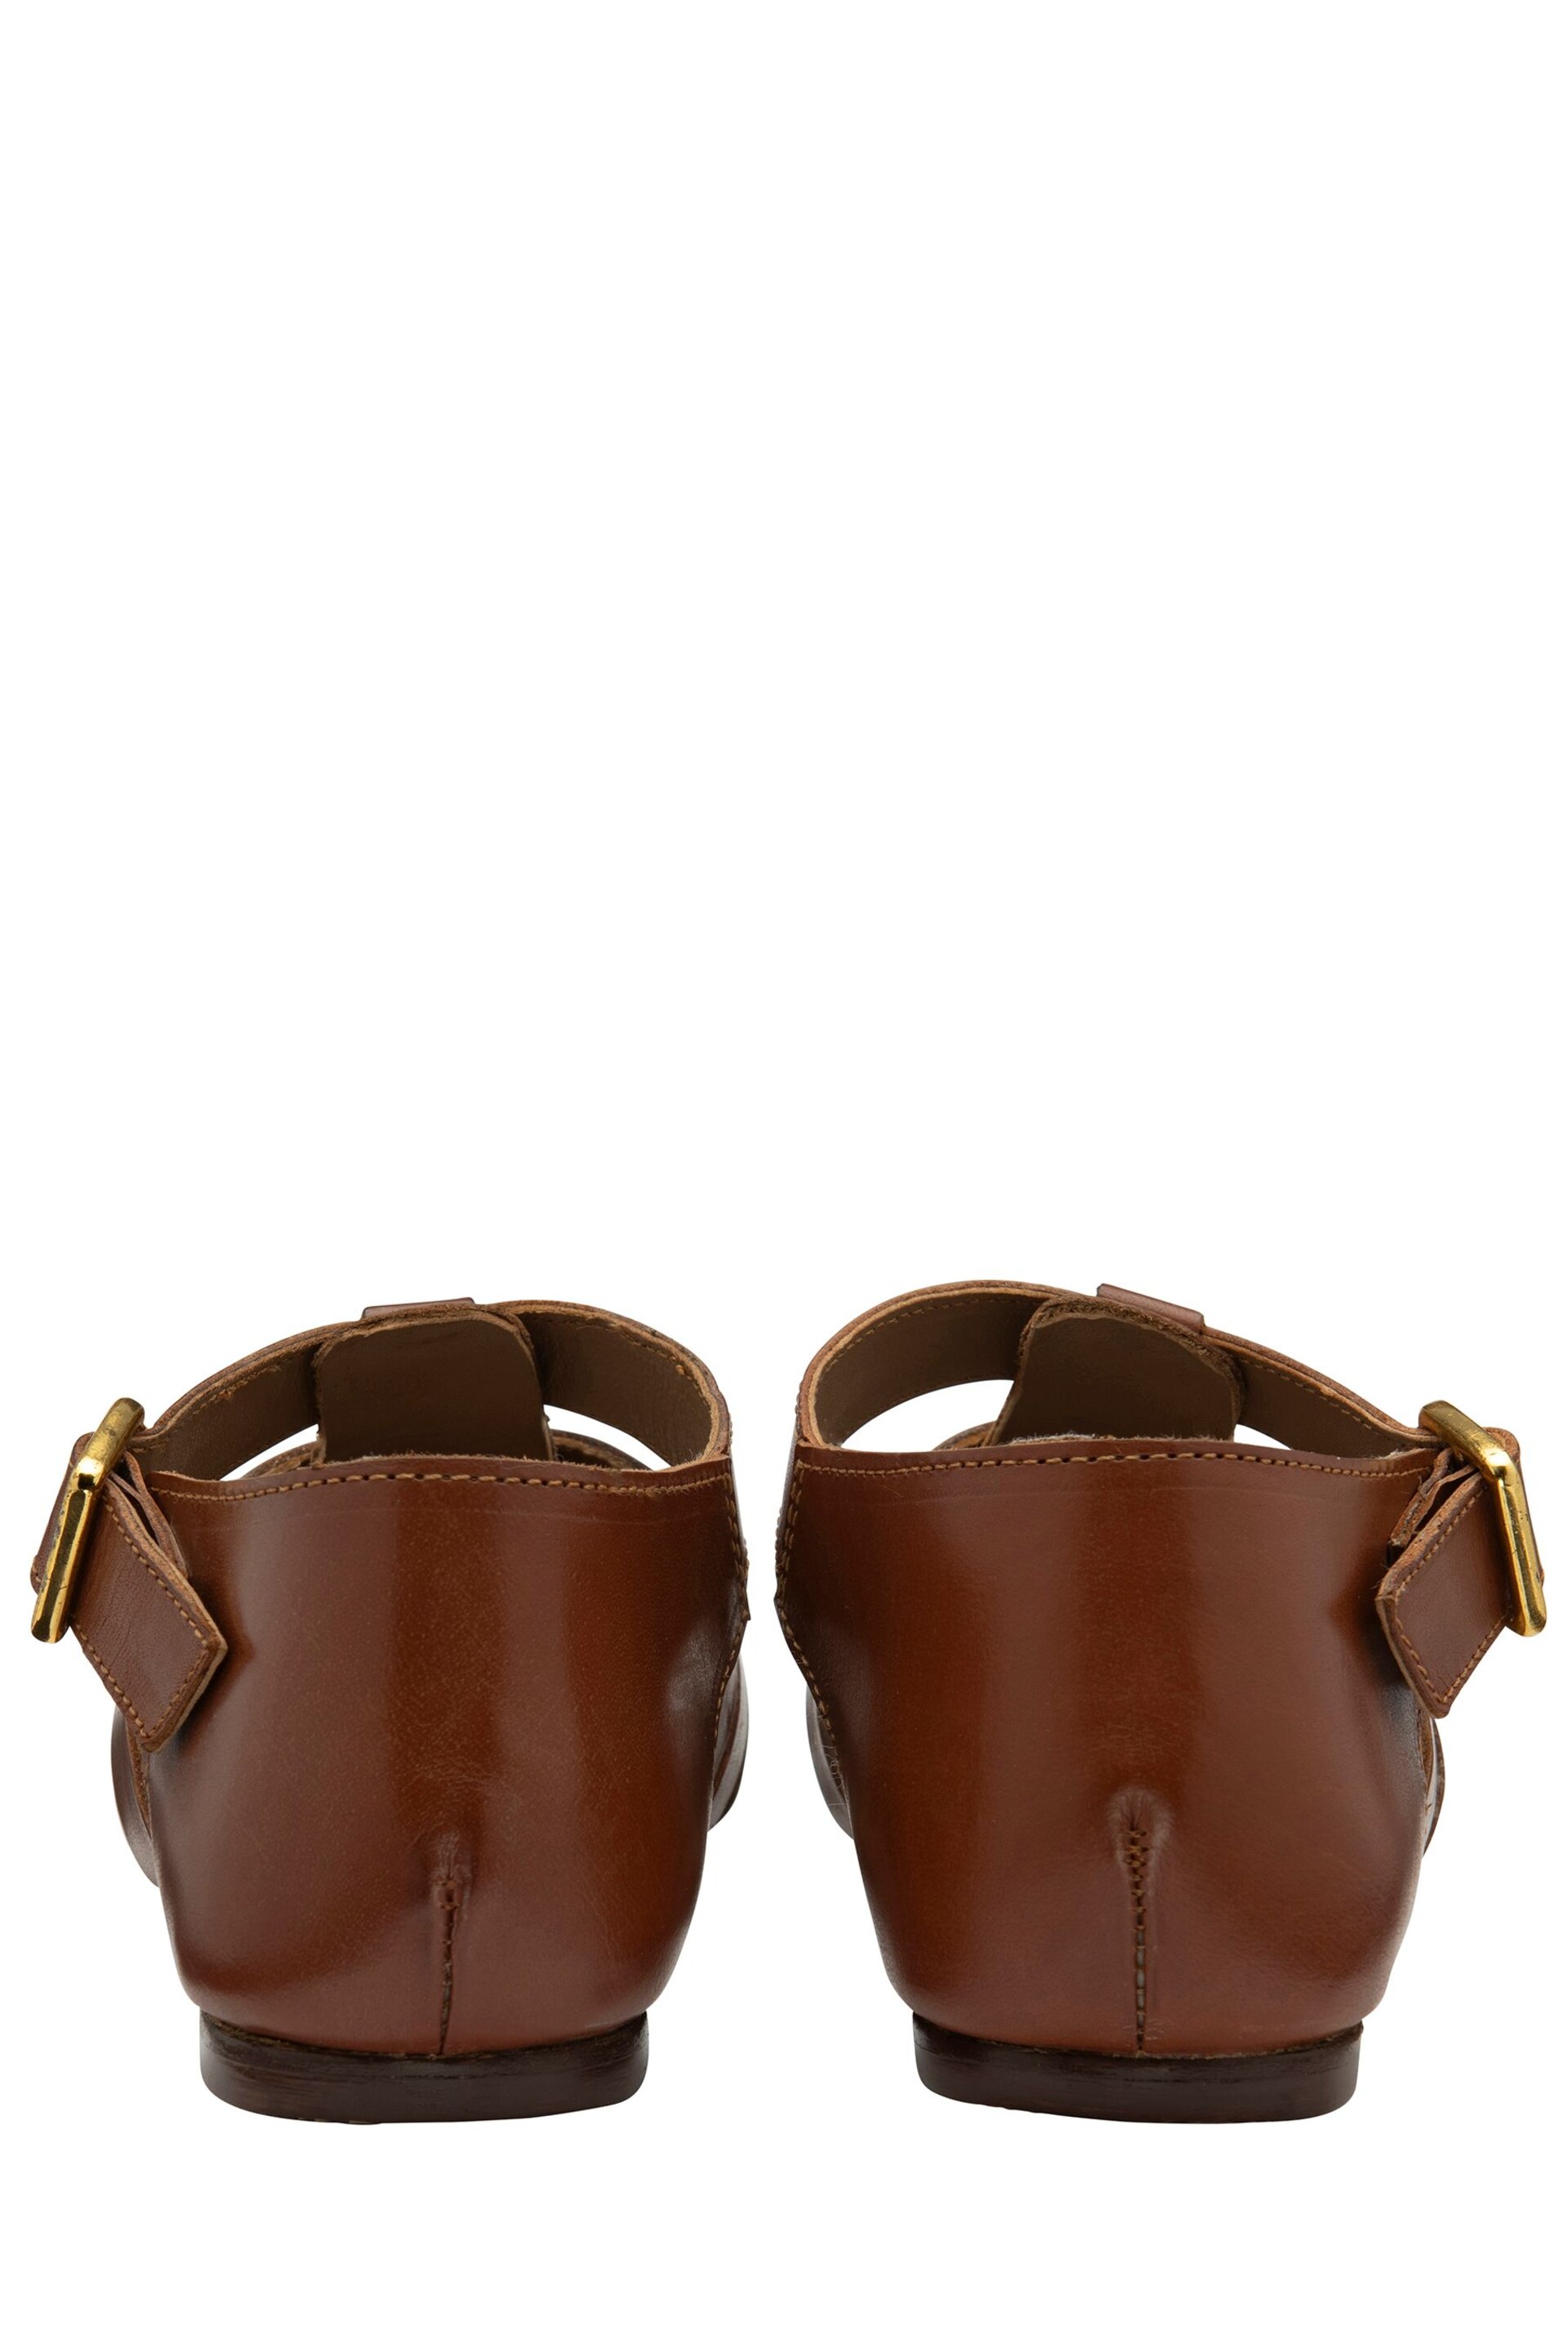 Ravel Brown Flat Leather Fisherman Sandals - Image 3 of 4